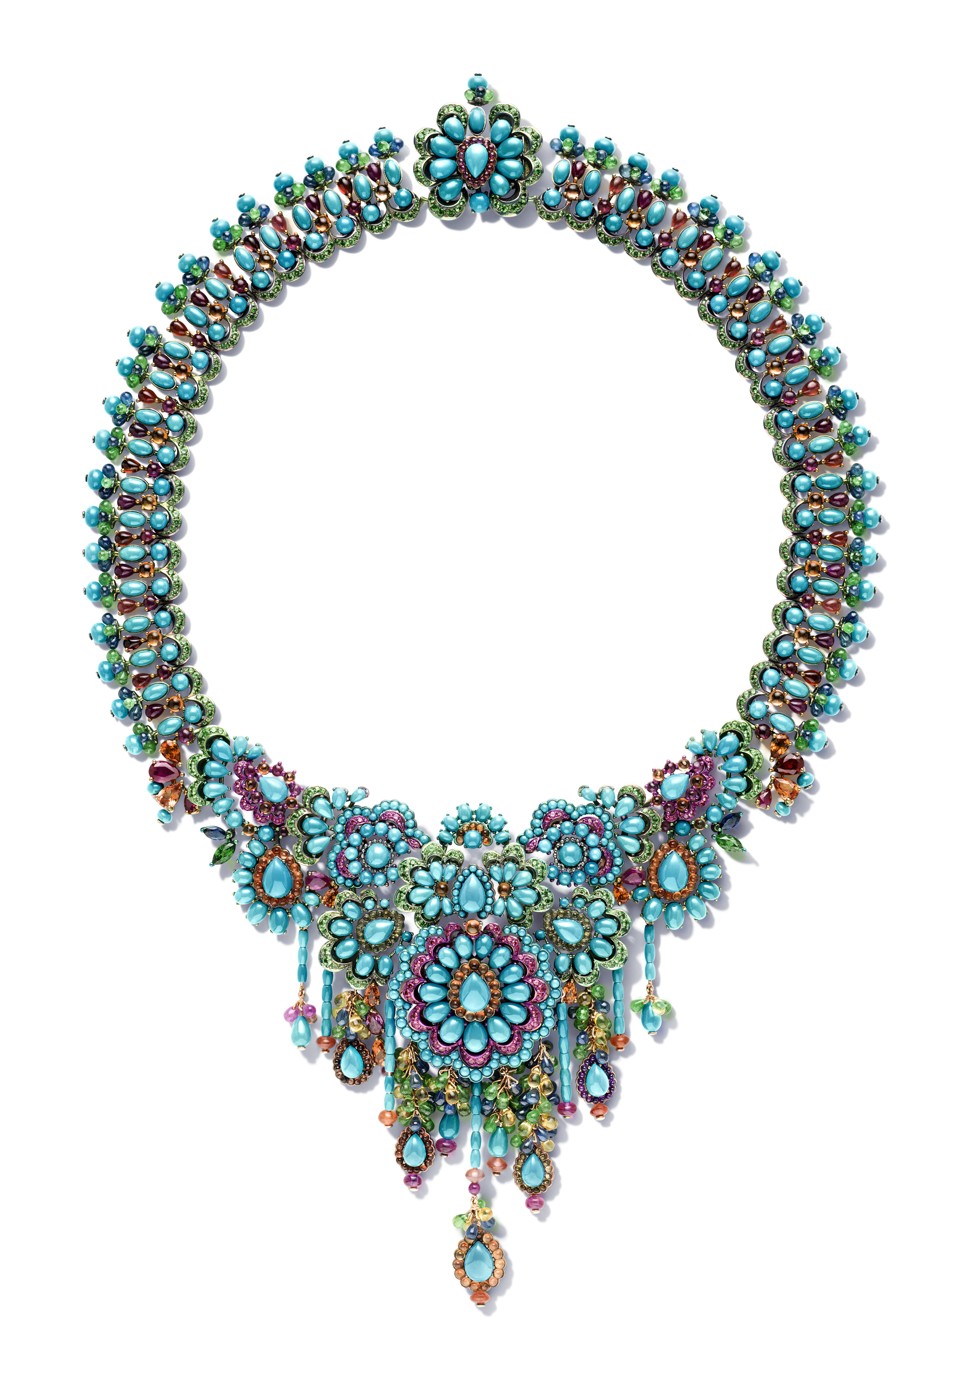 A ‘Rihanna Loves Chopard’ necklace in 18 ct rose gold and titanium composed of rubies, blue, orange and yellow sapphires, spinels and tsavorites of various cuts.